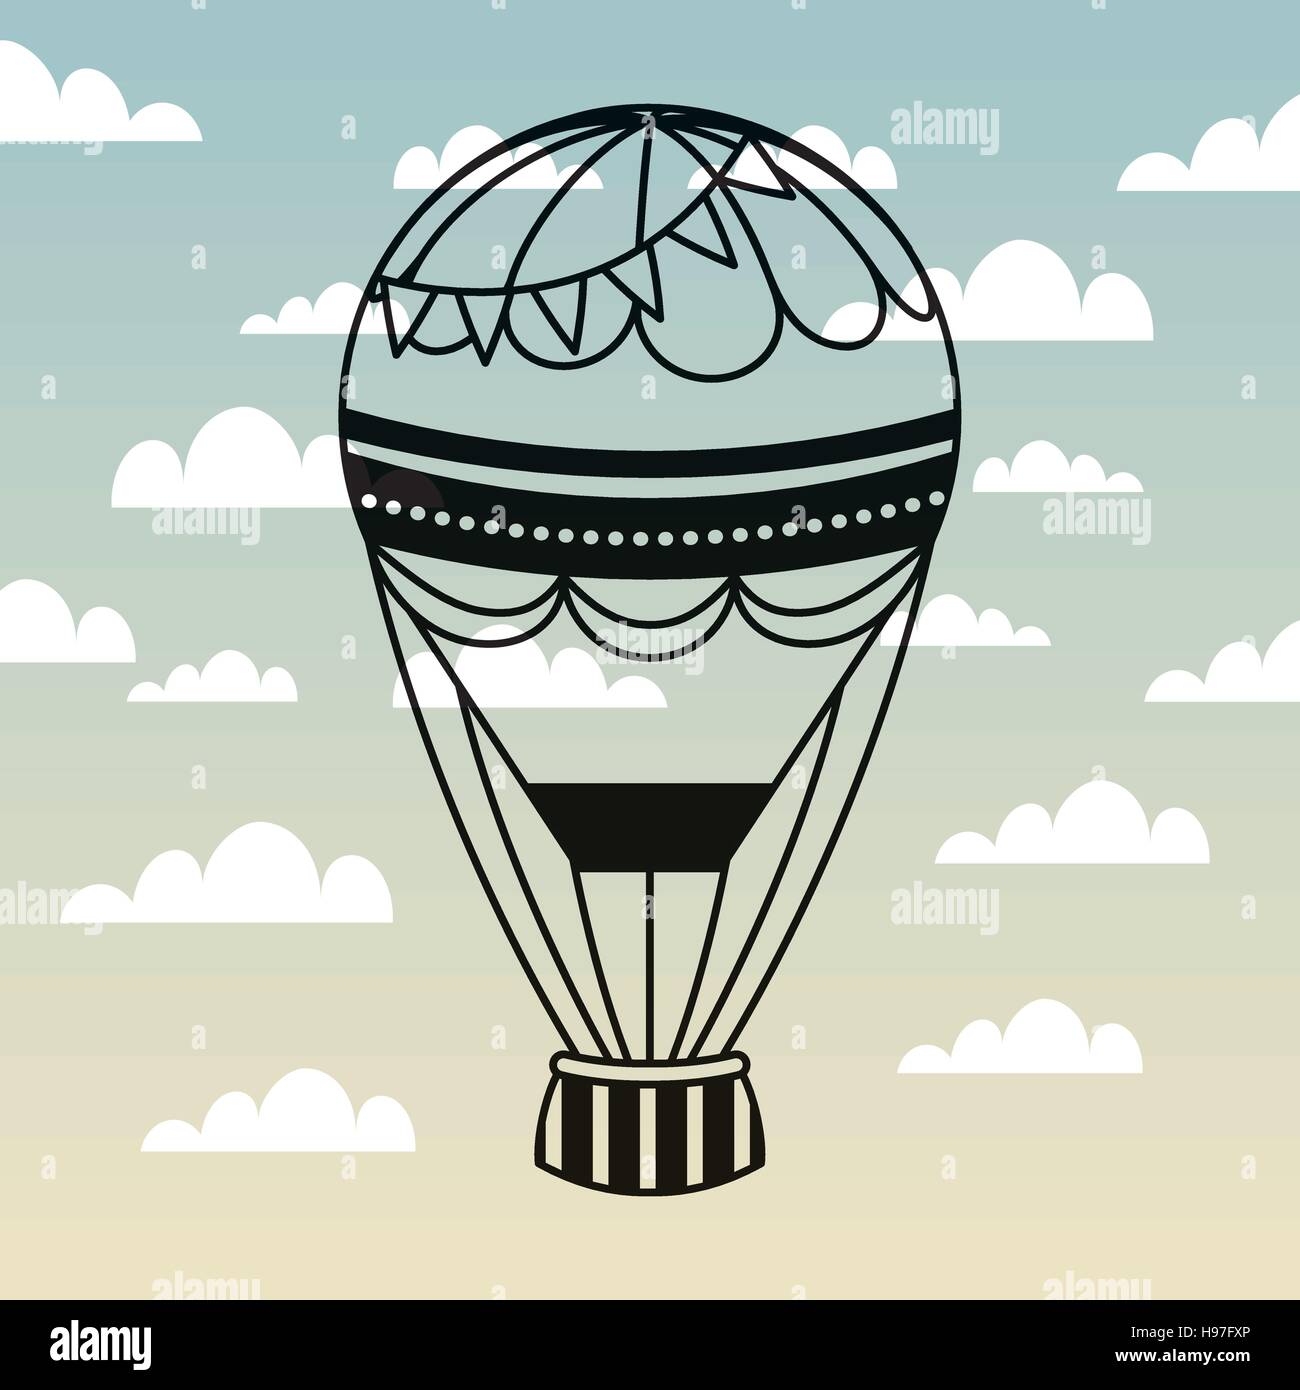 air balloon icon over sky background. colorful design. vector illustration Stock Vector